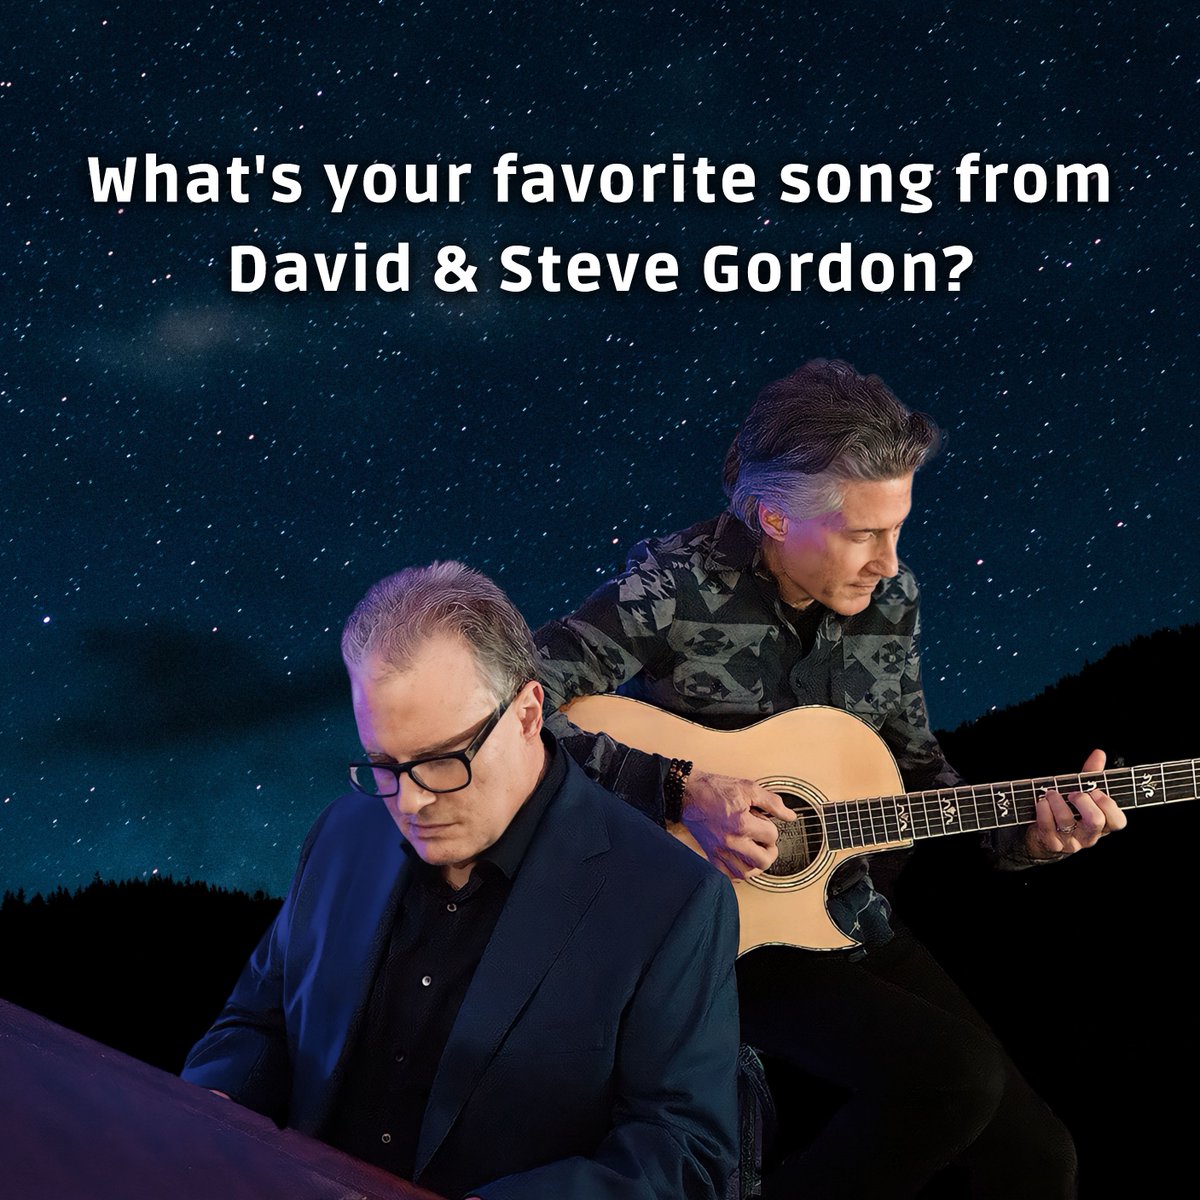 We're eager to hear which song resonates most with you.

Listen to our music here: lnk.to/DavidAndSteveG…

#davidandstevegordon #healingmusic #healingenergy #meditationmusic #relaxationmusic #shamanicmusic #spirituality